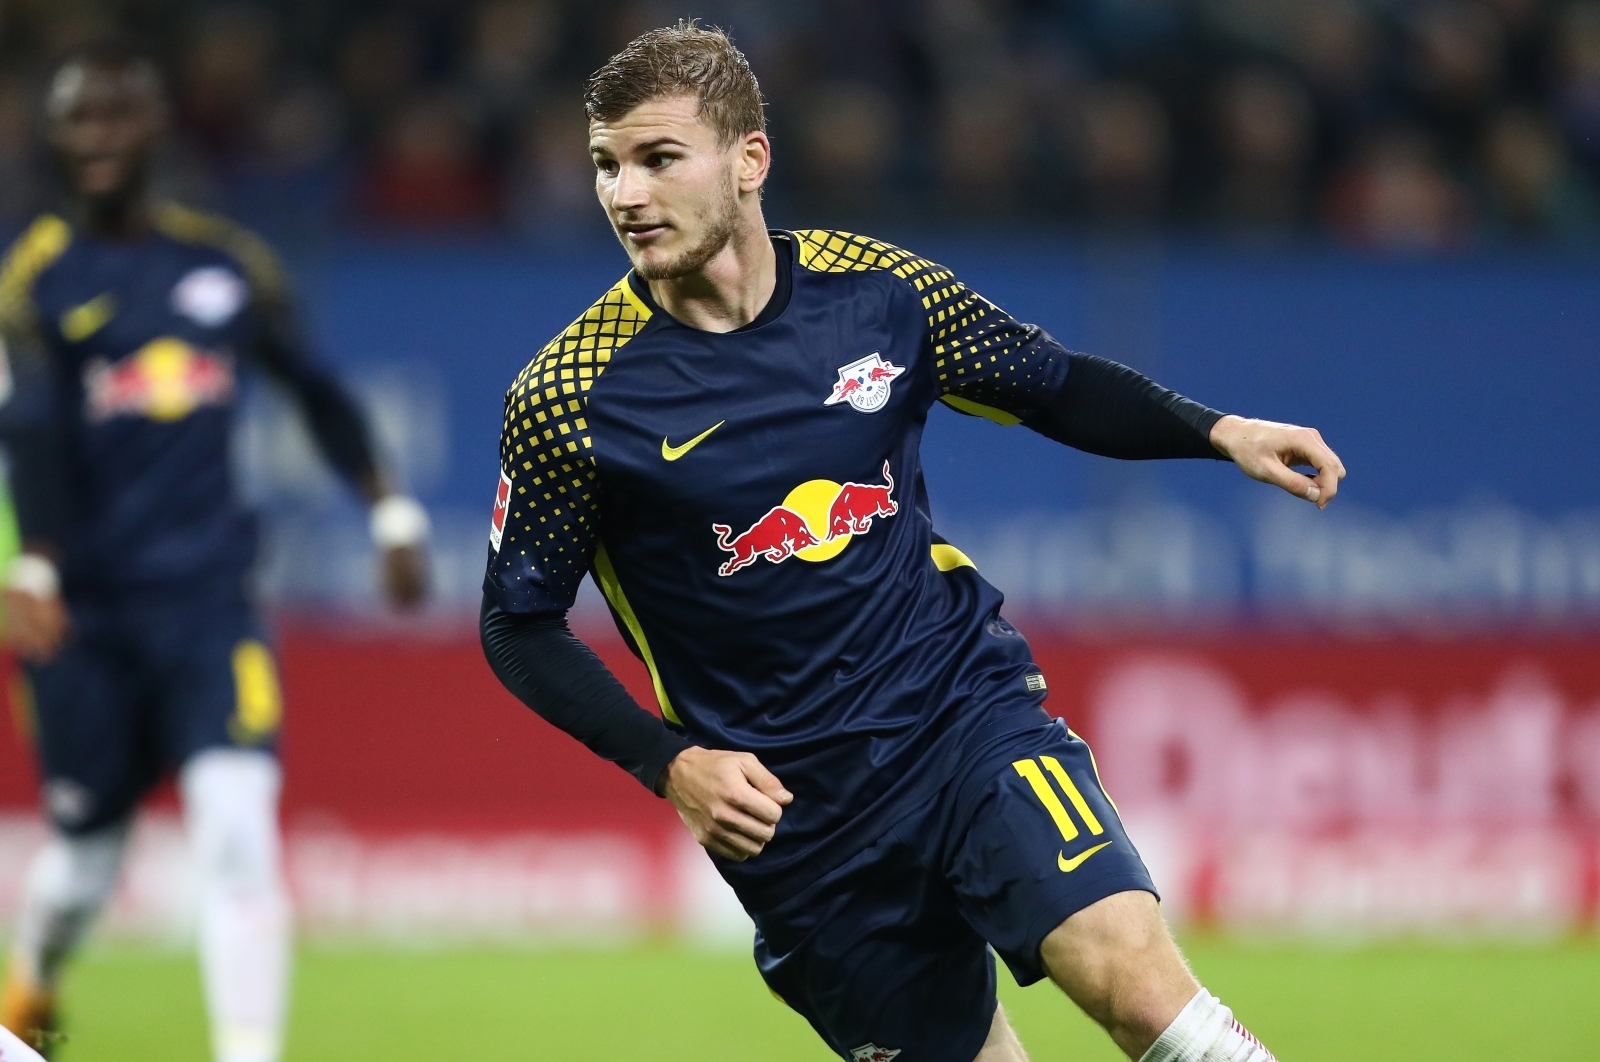 Liverpool and Real Madrid target Timo Werner has no release clause confirm RB Leipzig